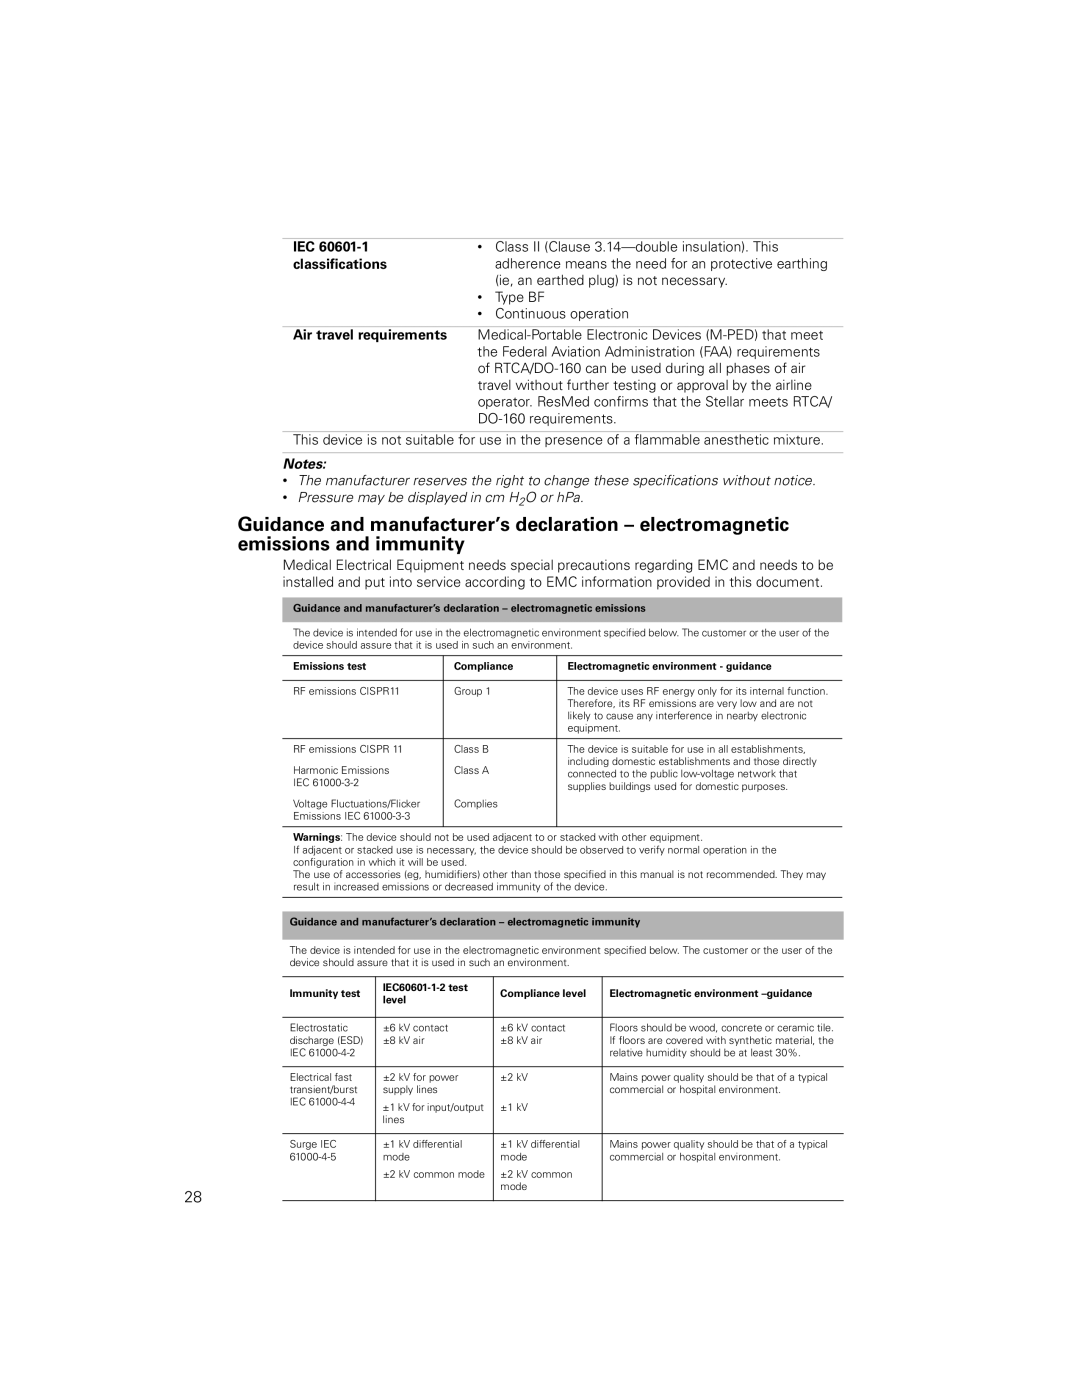 ResMed 2011-09, 248551/1 manual classifications, Air travel requirements 